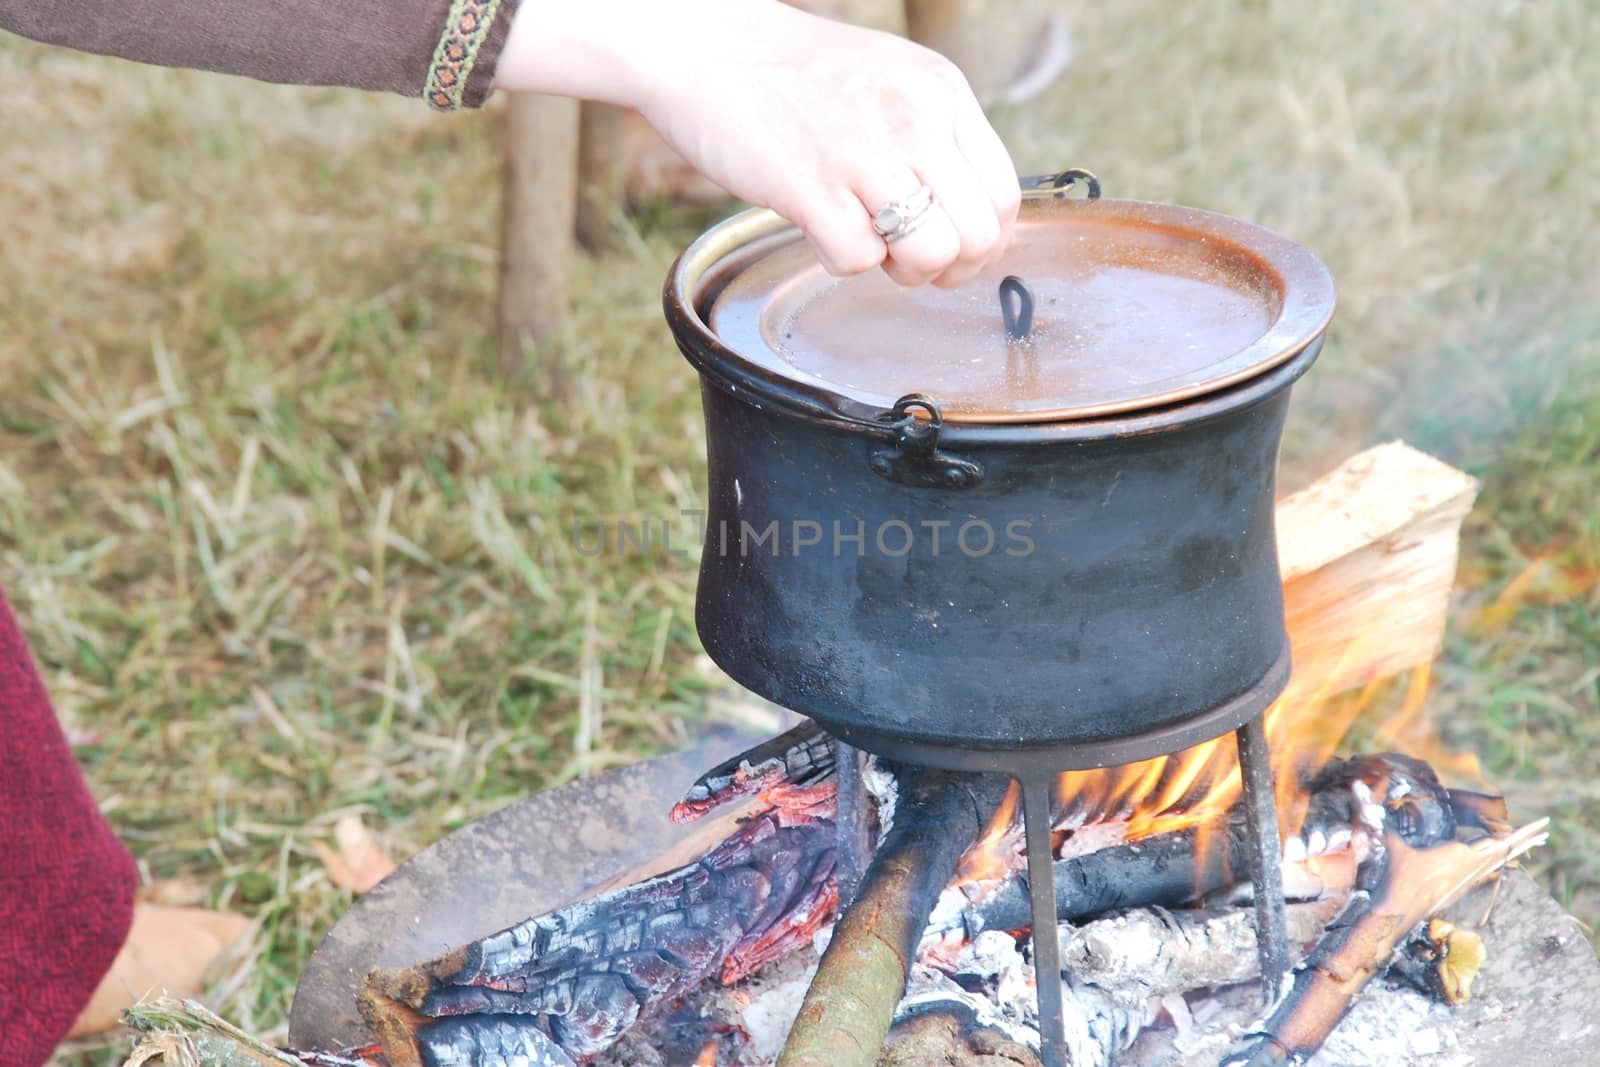 Cooking with an Outdoor pot over fire by pauws99